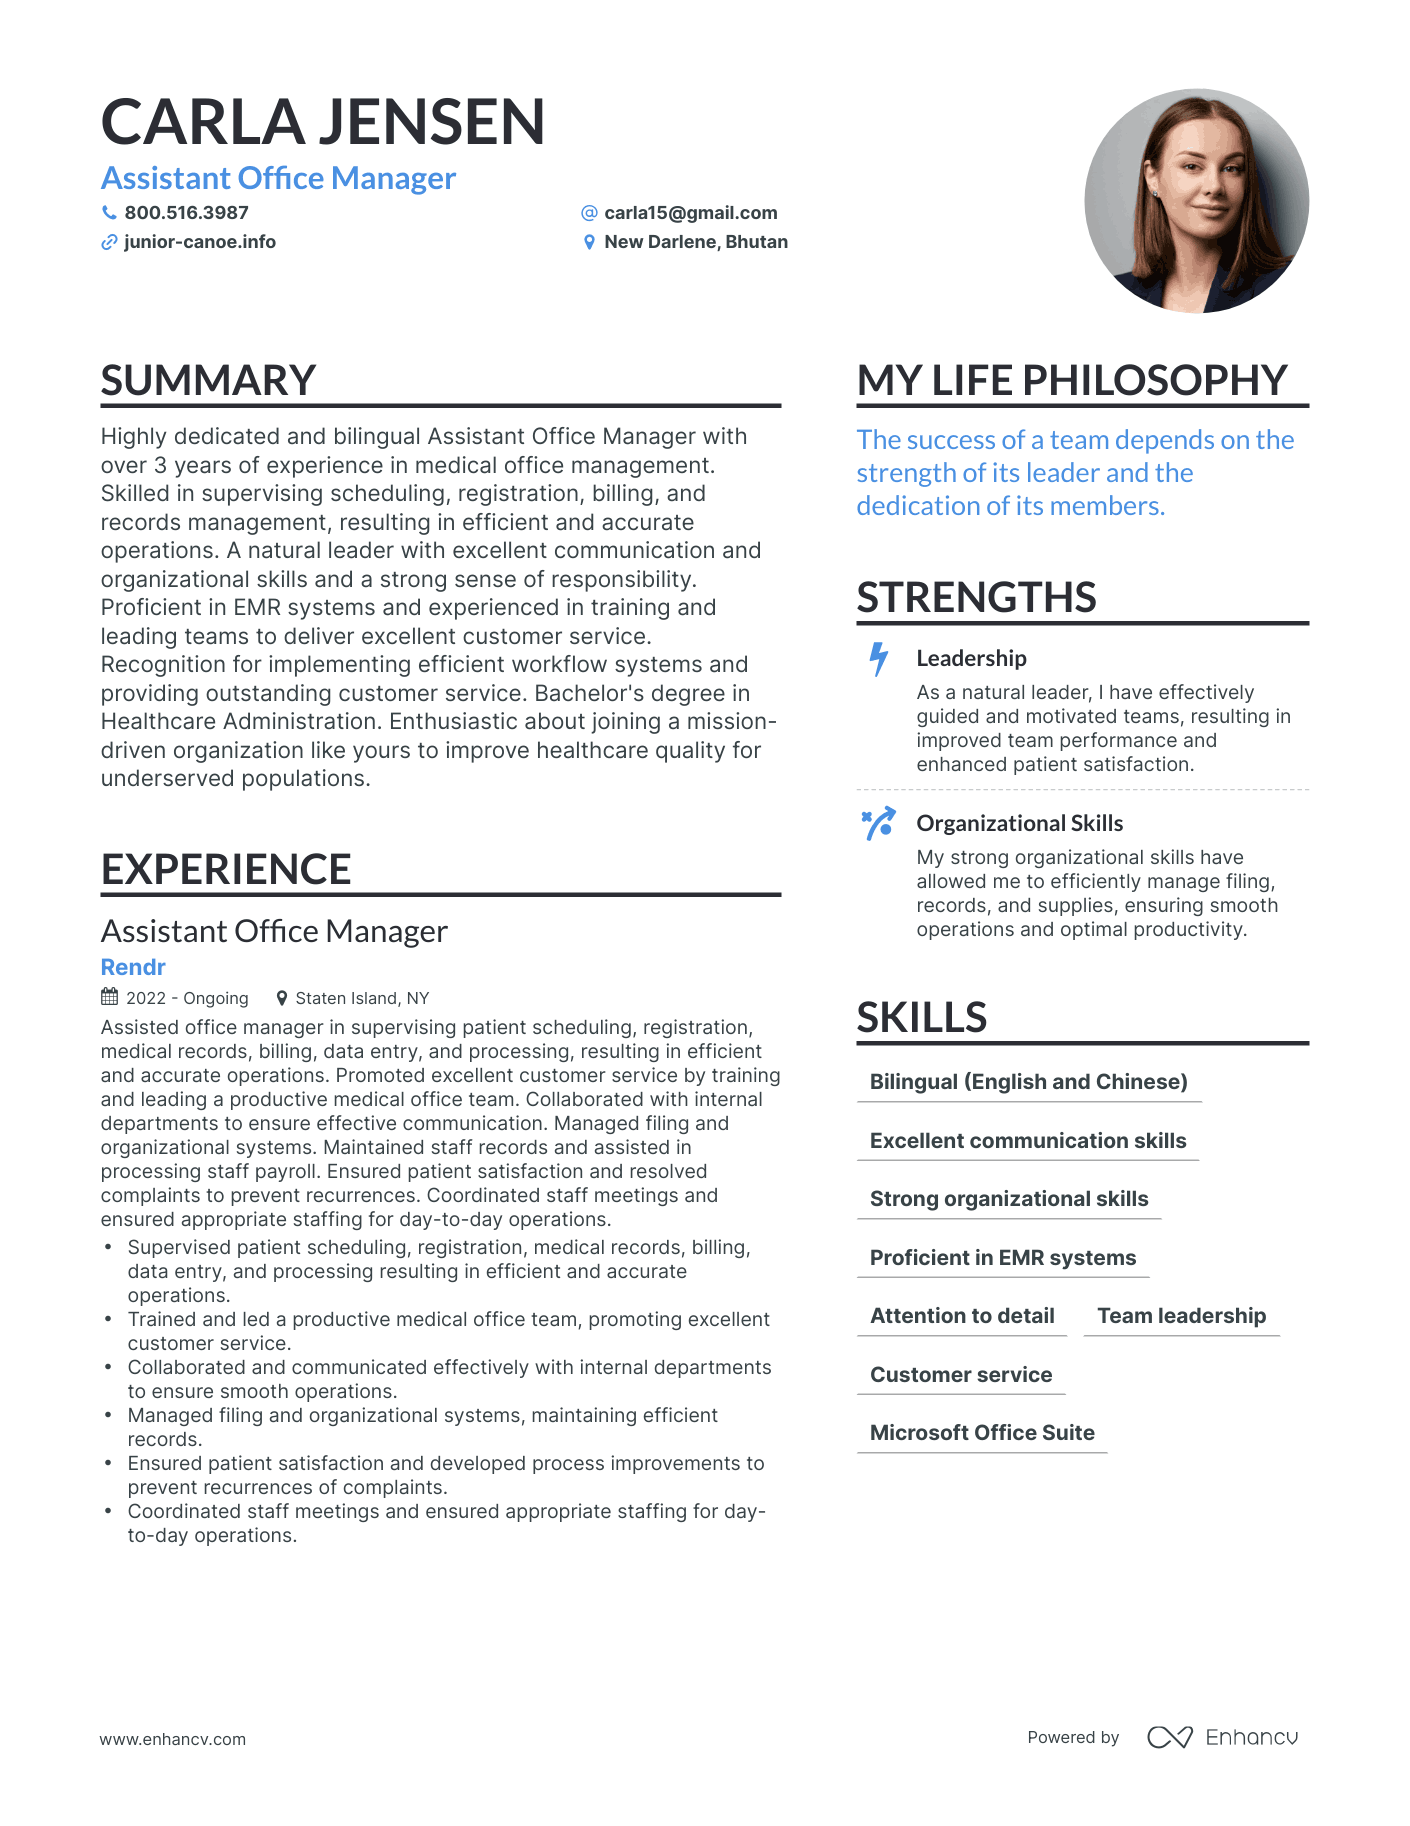 Assistant Office Manager resume example